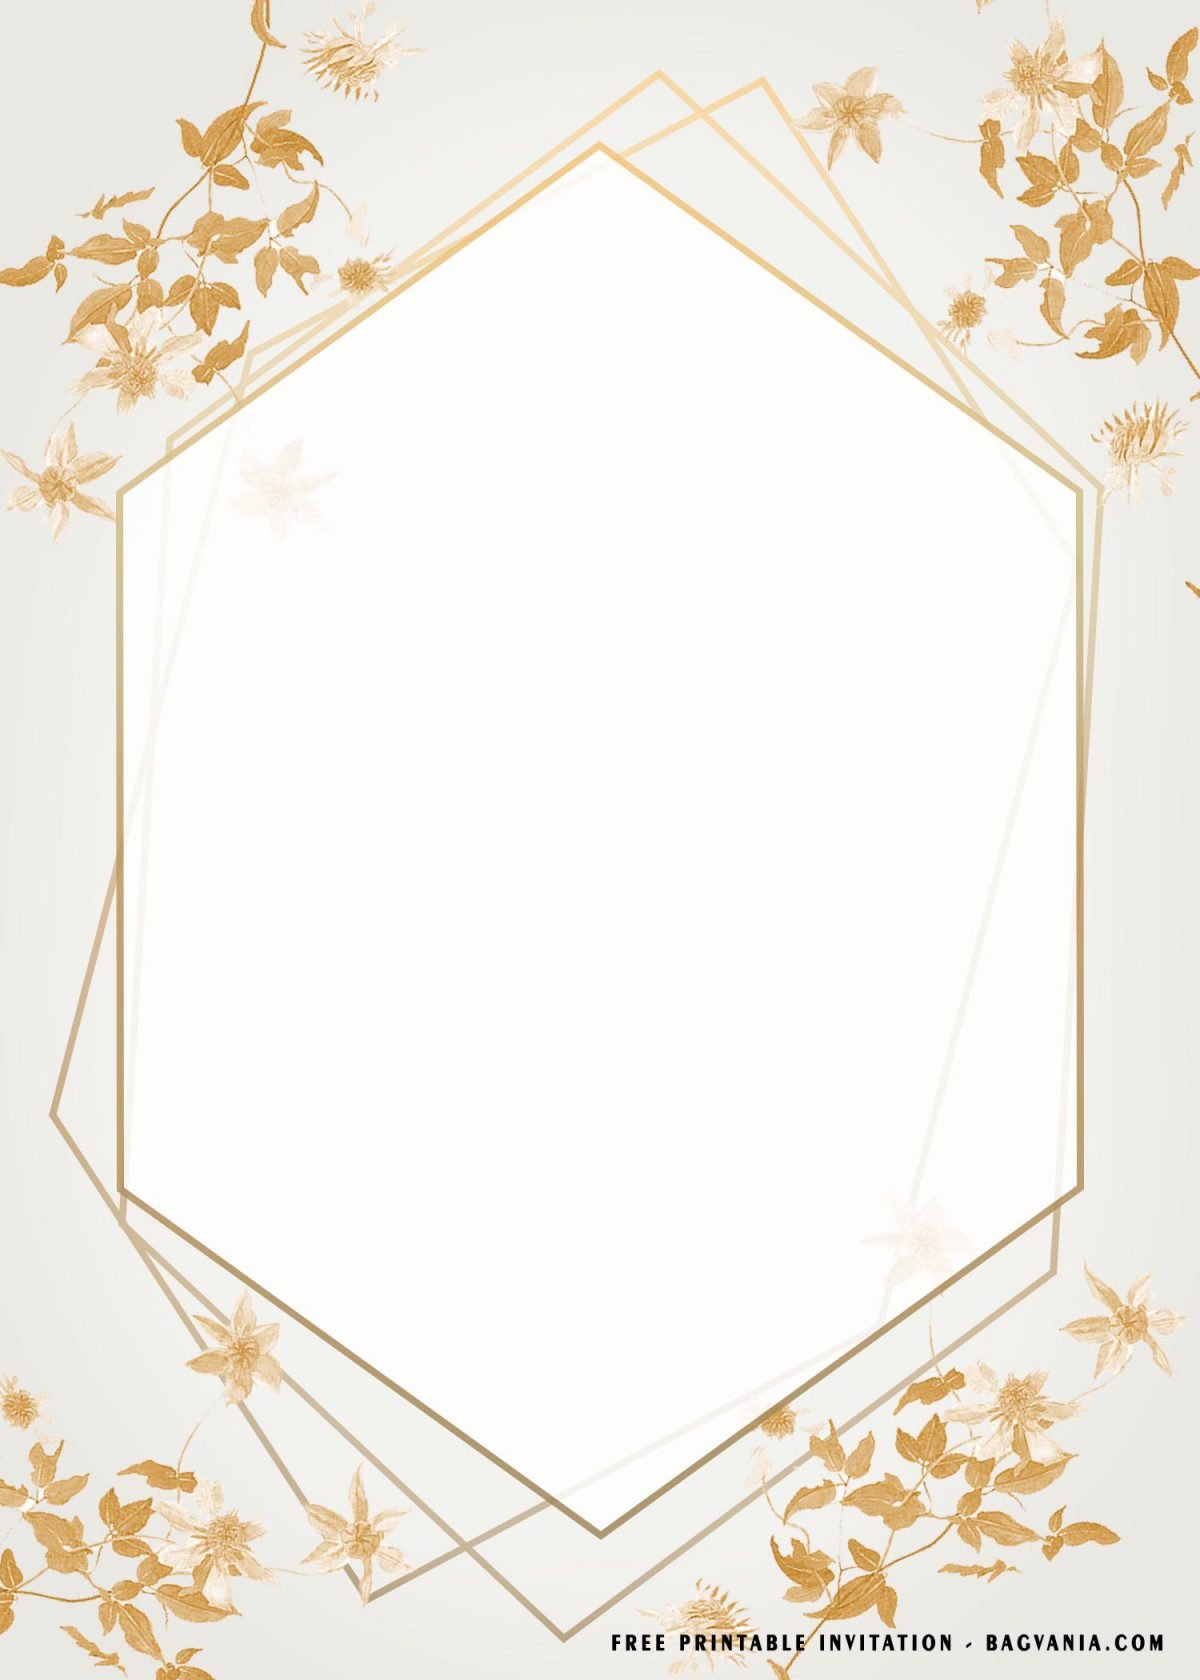 Free Printable Glitter Floral Baby Shower Invitation Templates With Geometrical Frame Design